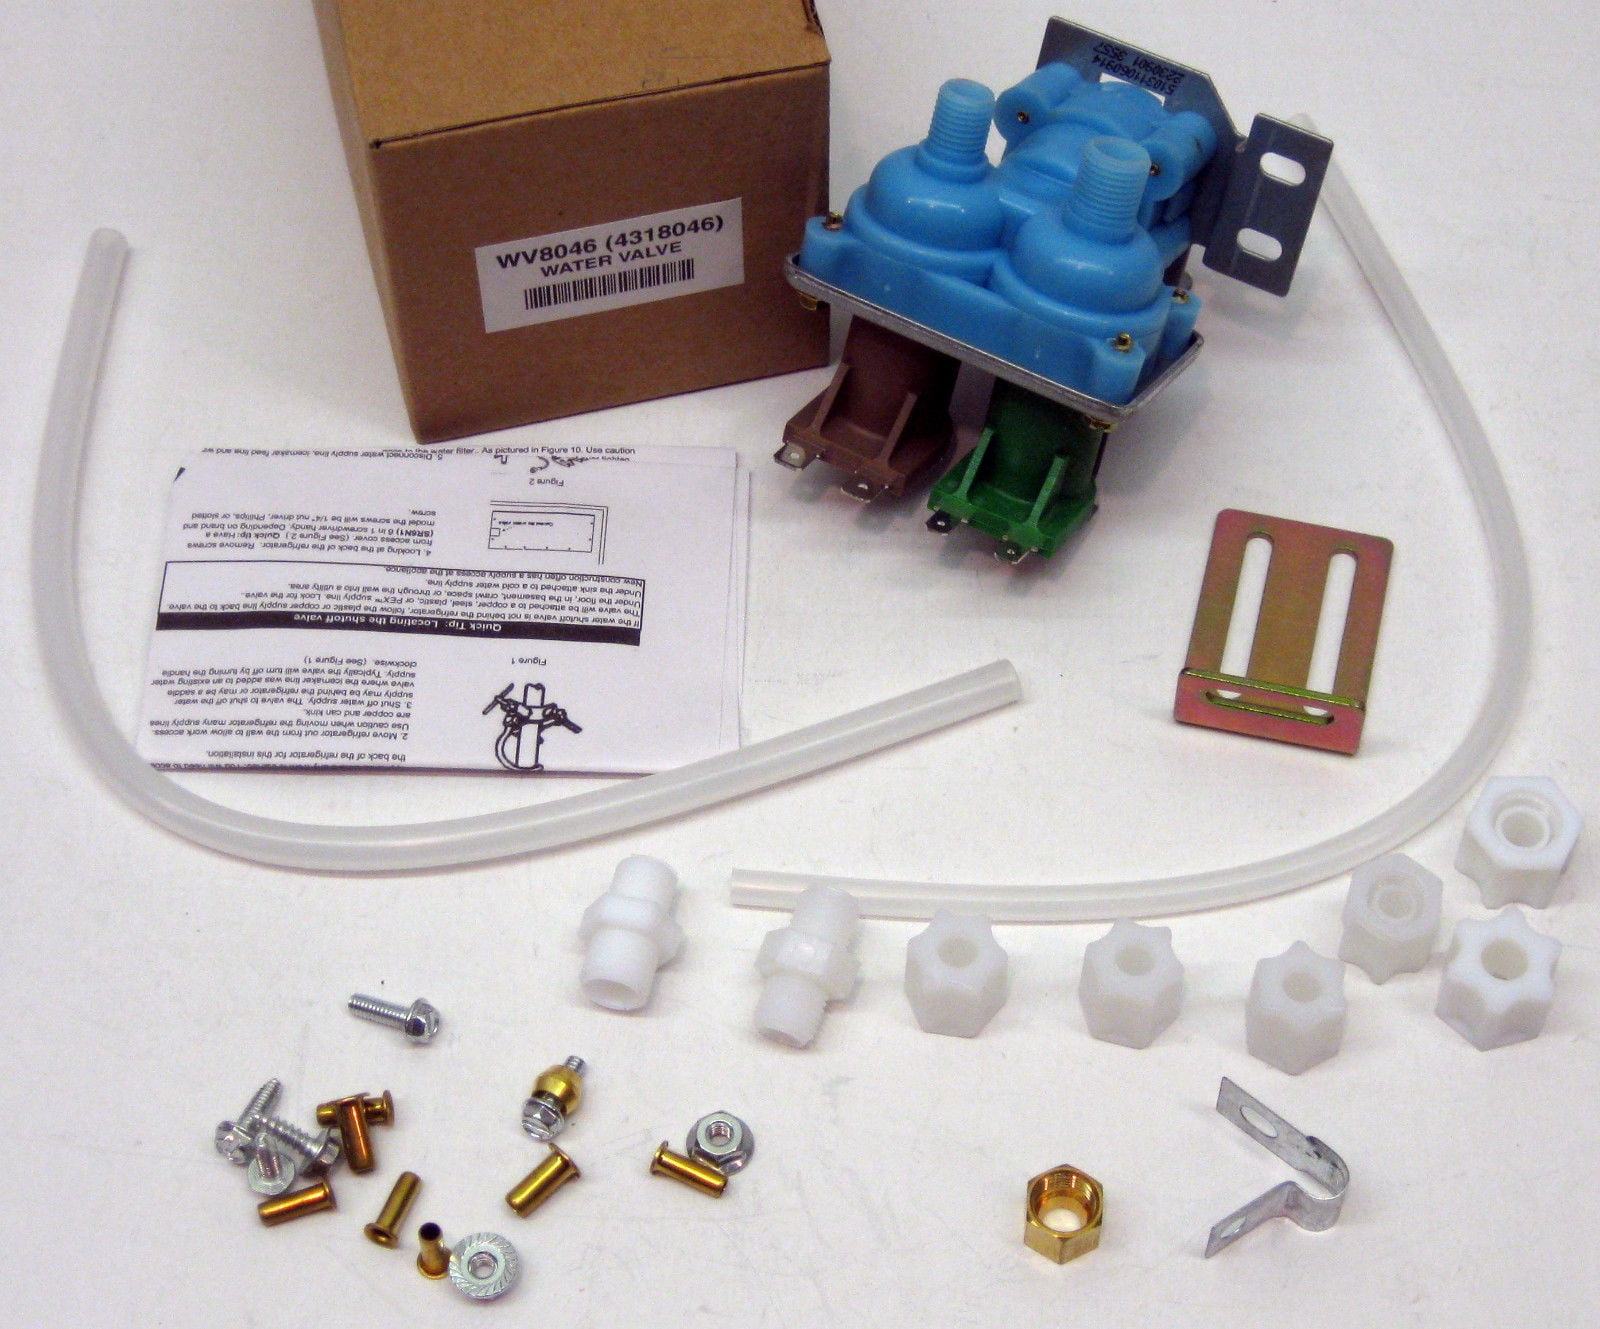 Icemaker Water Dual Valve for Whirlpool Part # 4318046 ER4318046